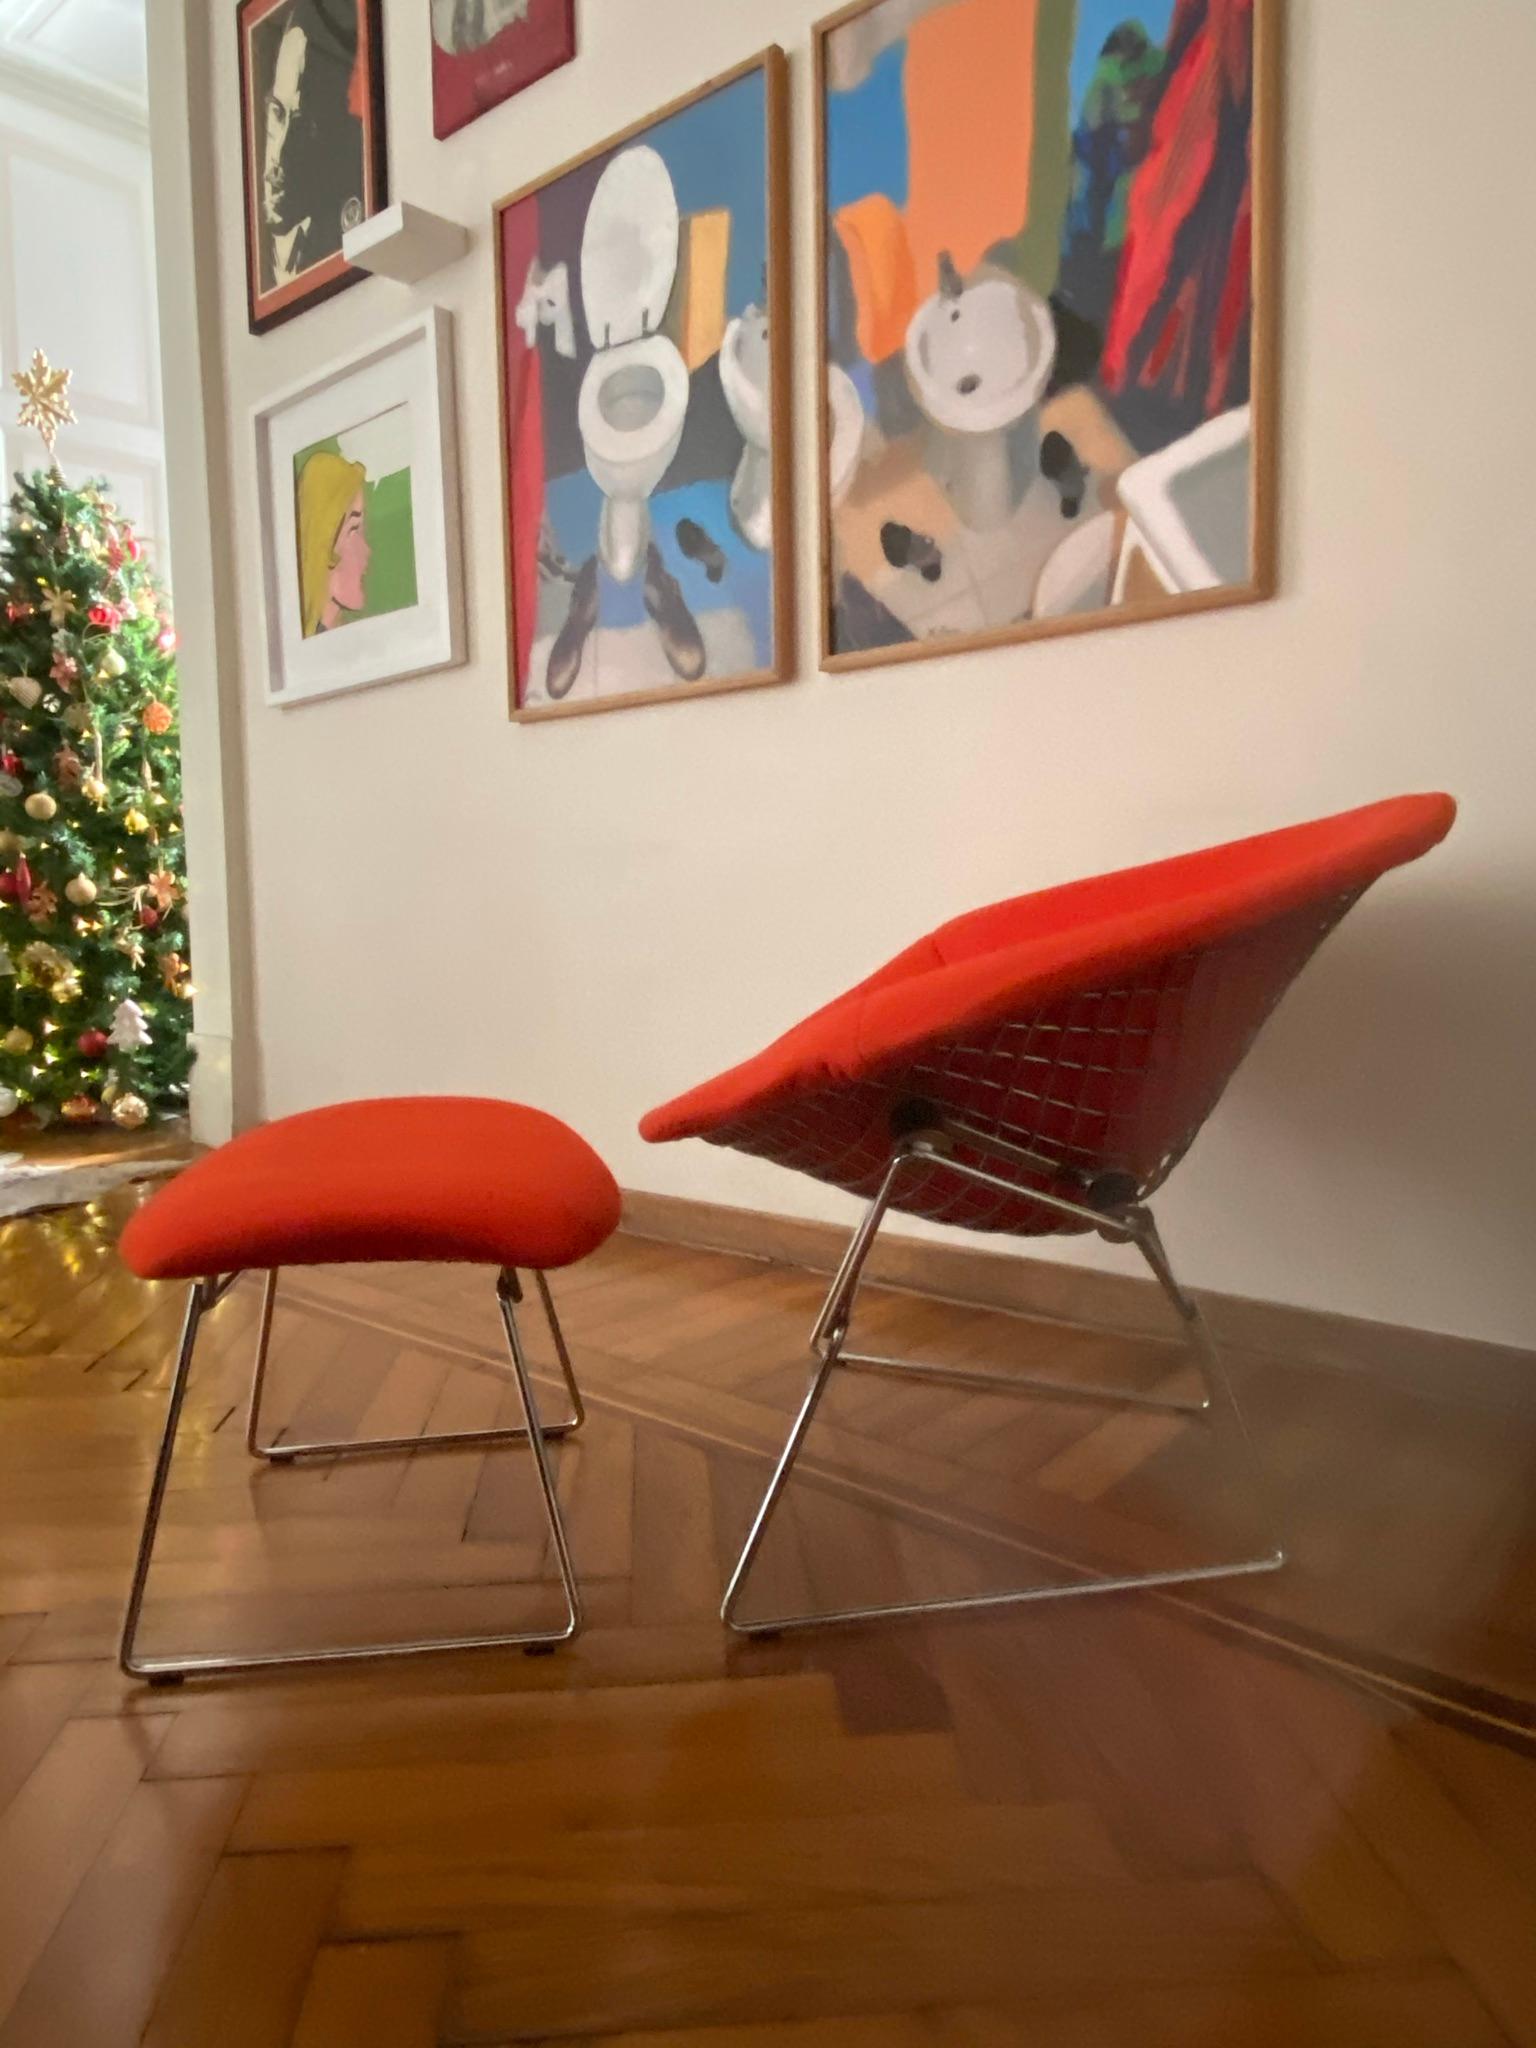 Mid-20th Century Chromed and Red Harry Bertoia Large Diamond Chair and Ottoman for Knoll